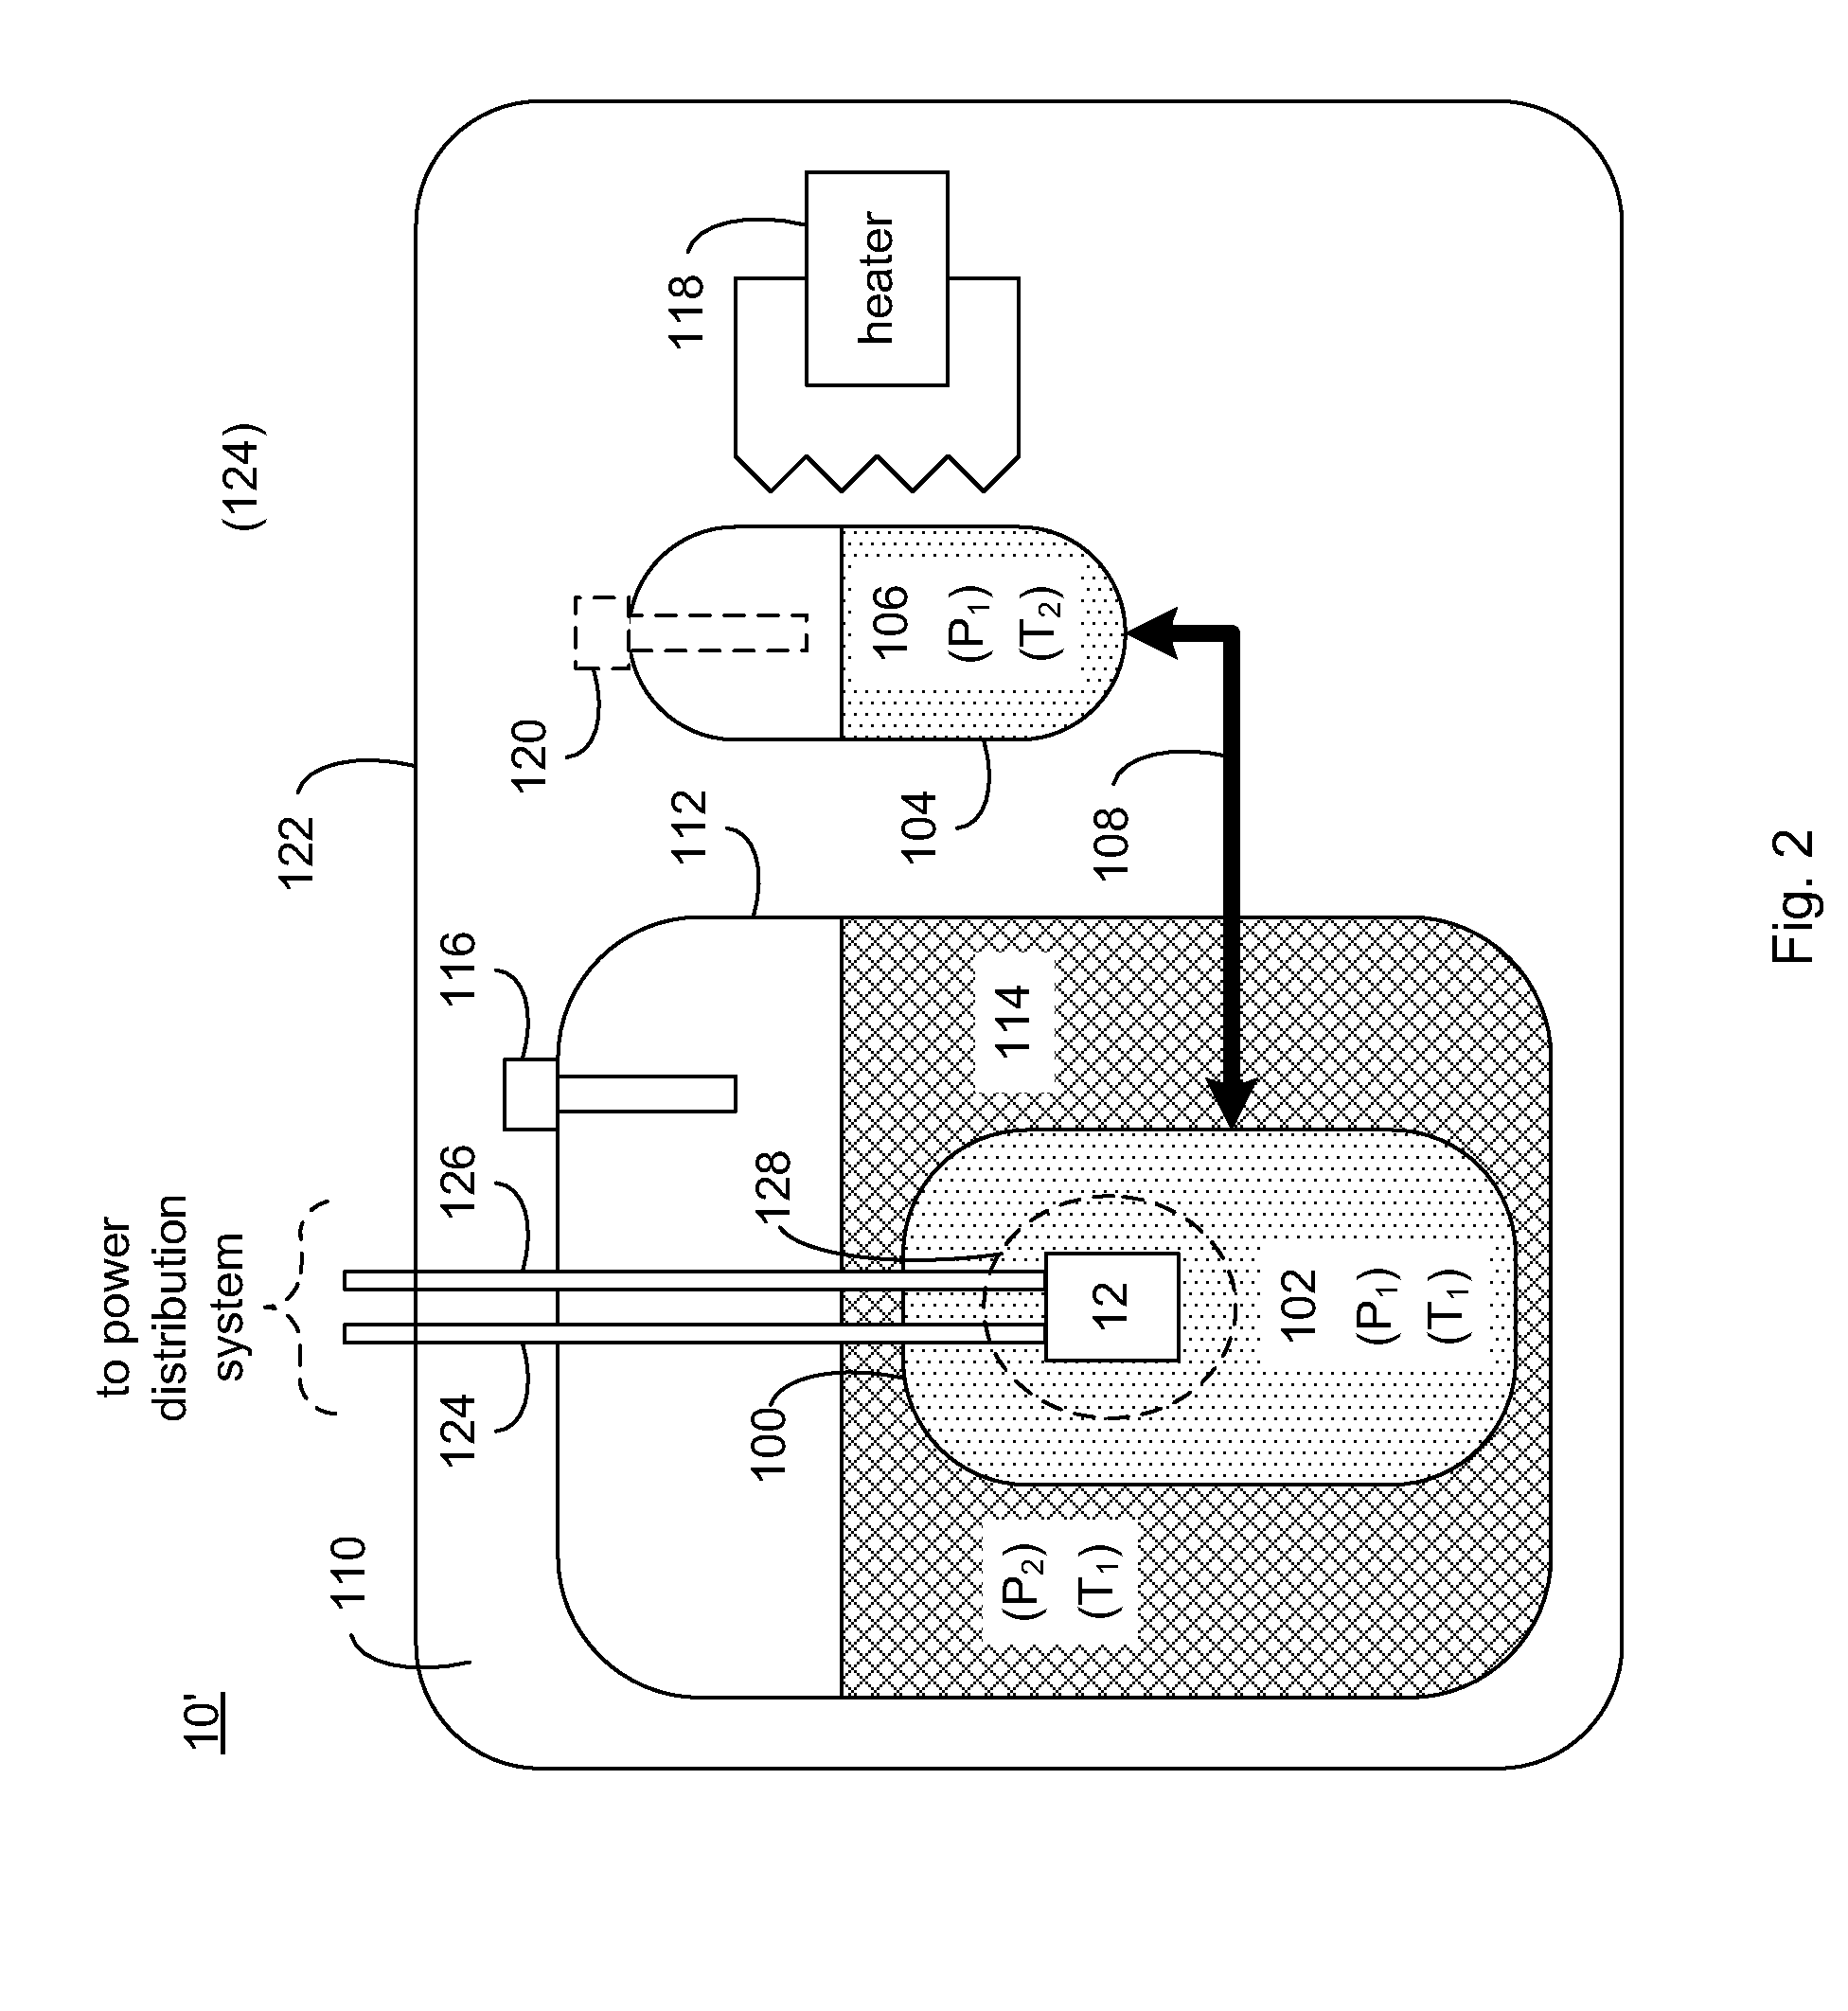 Component cooling system